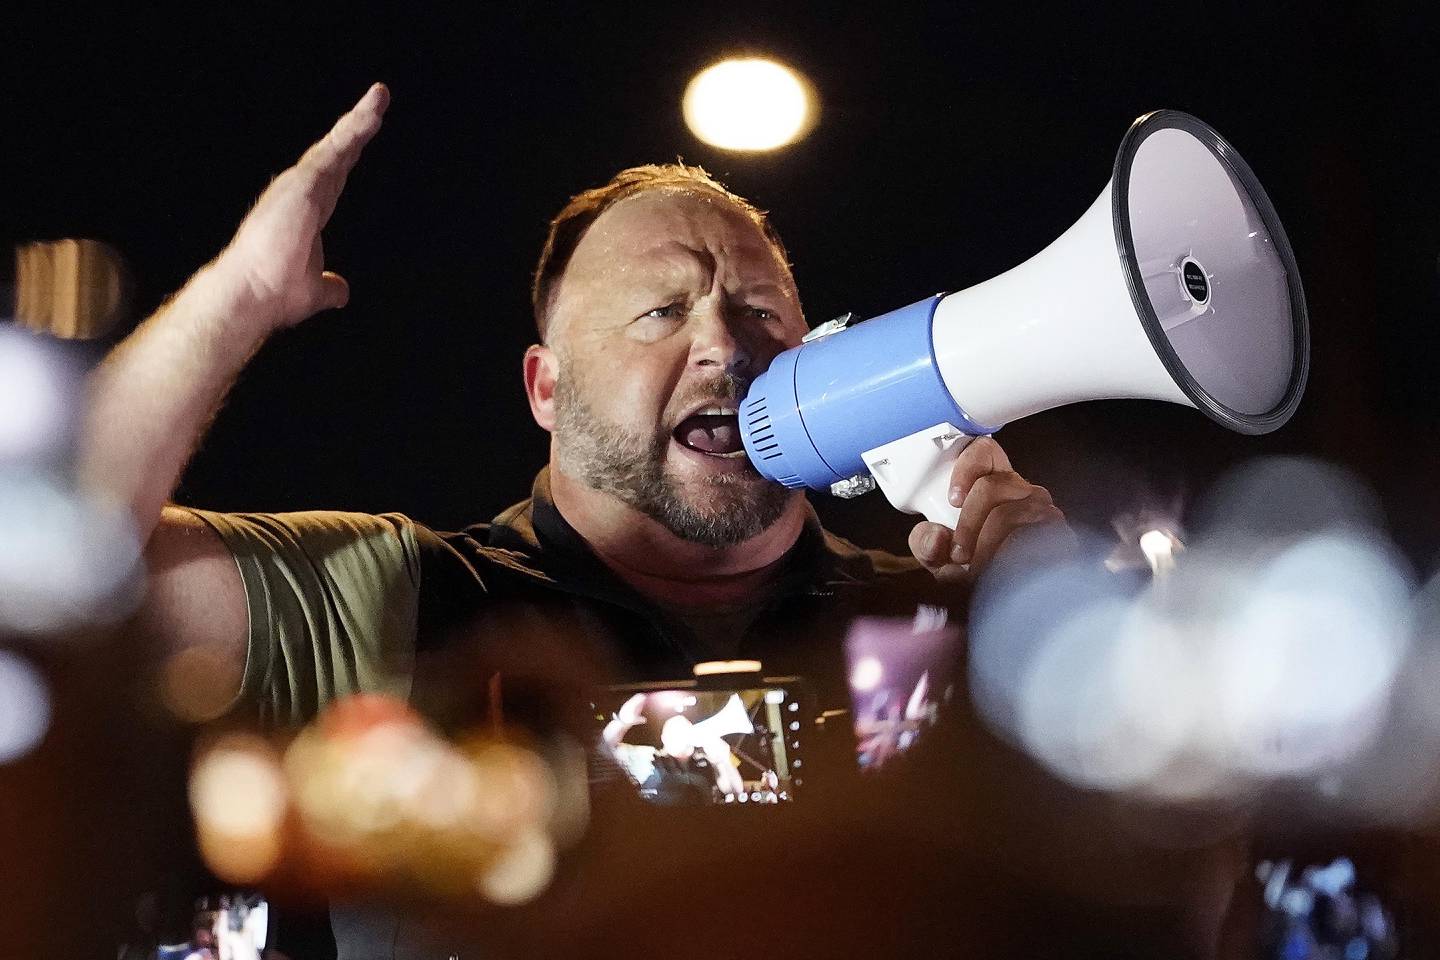 FILE - In this Nov. 5, 2020 file photo, radio host Alex Jones rallies pro Trump supporters outside the Maricopa County Recorder's Office, in Phoenix. The U.S. Supreme Court on Monday, April 5, 2021 declined to hear an appeal by the Infowars host and conspiracy theorist, who was fighting a Connecticut court sanction in a defamation lawsuit brought by relatives of some of the victims of the Sandy Hook Elementary School shooting. (AP Photo/Matt York, File)